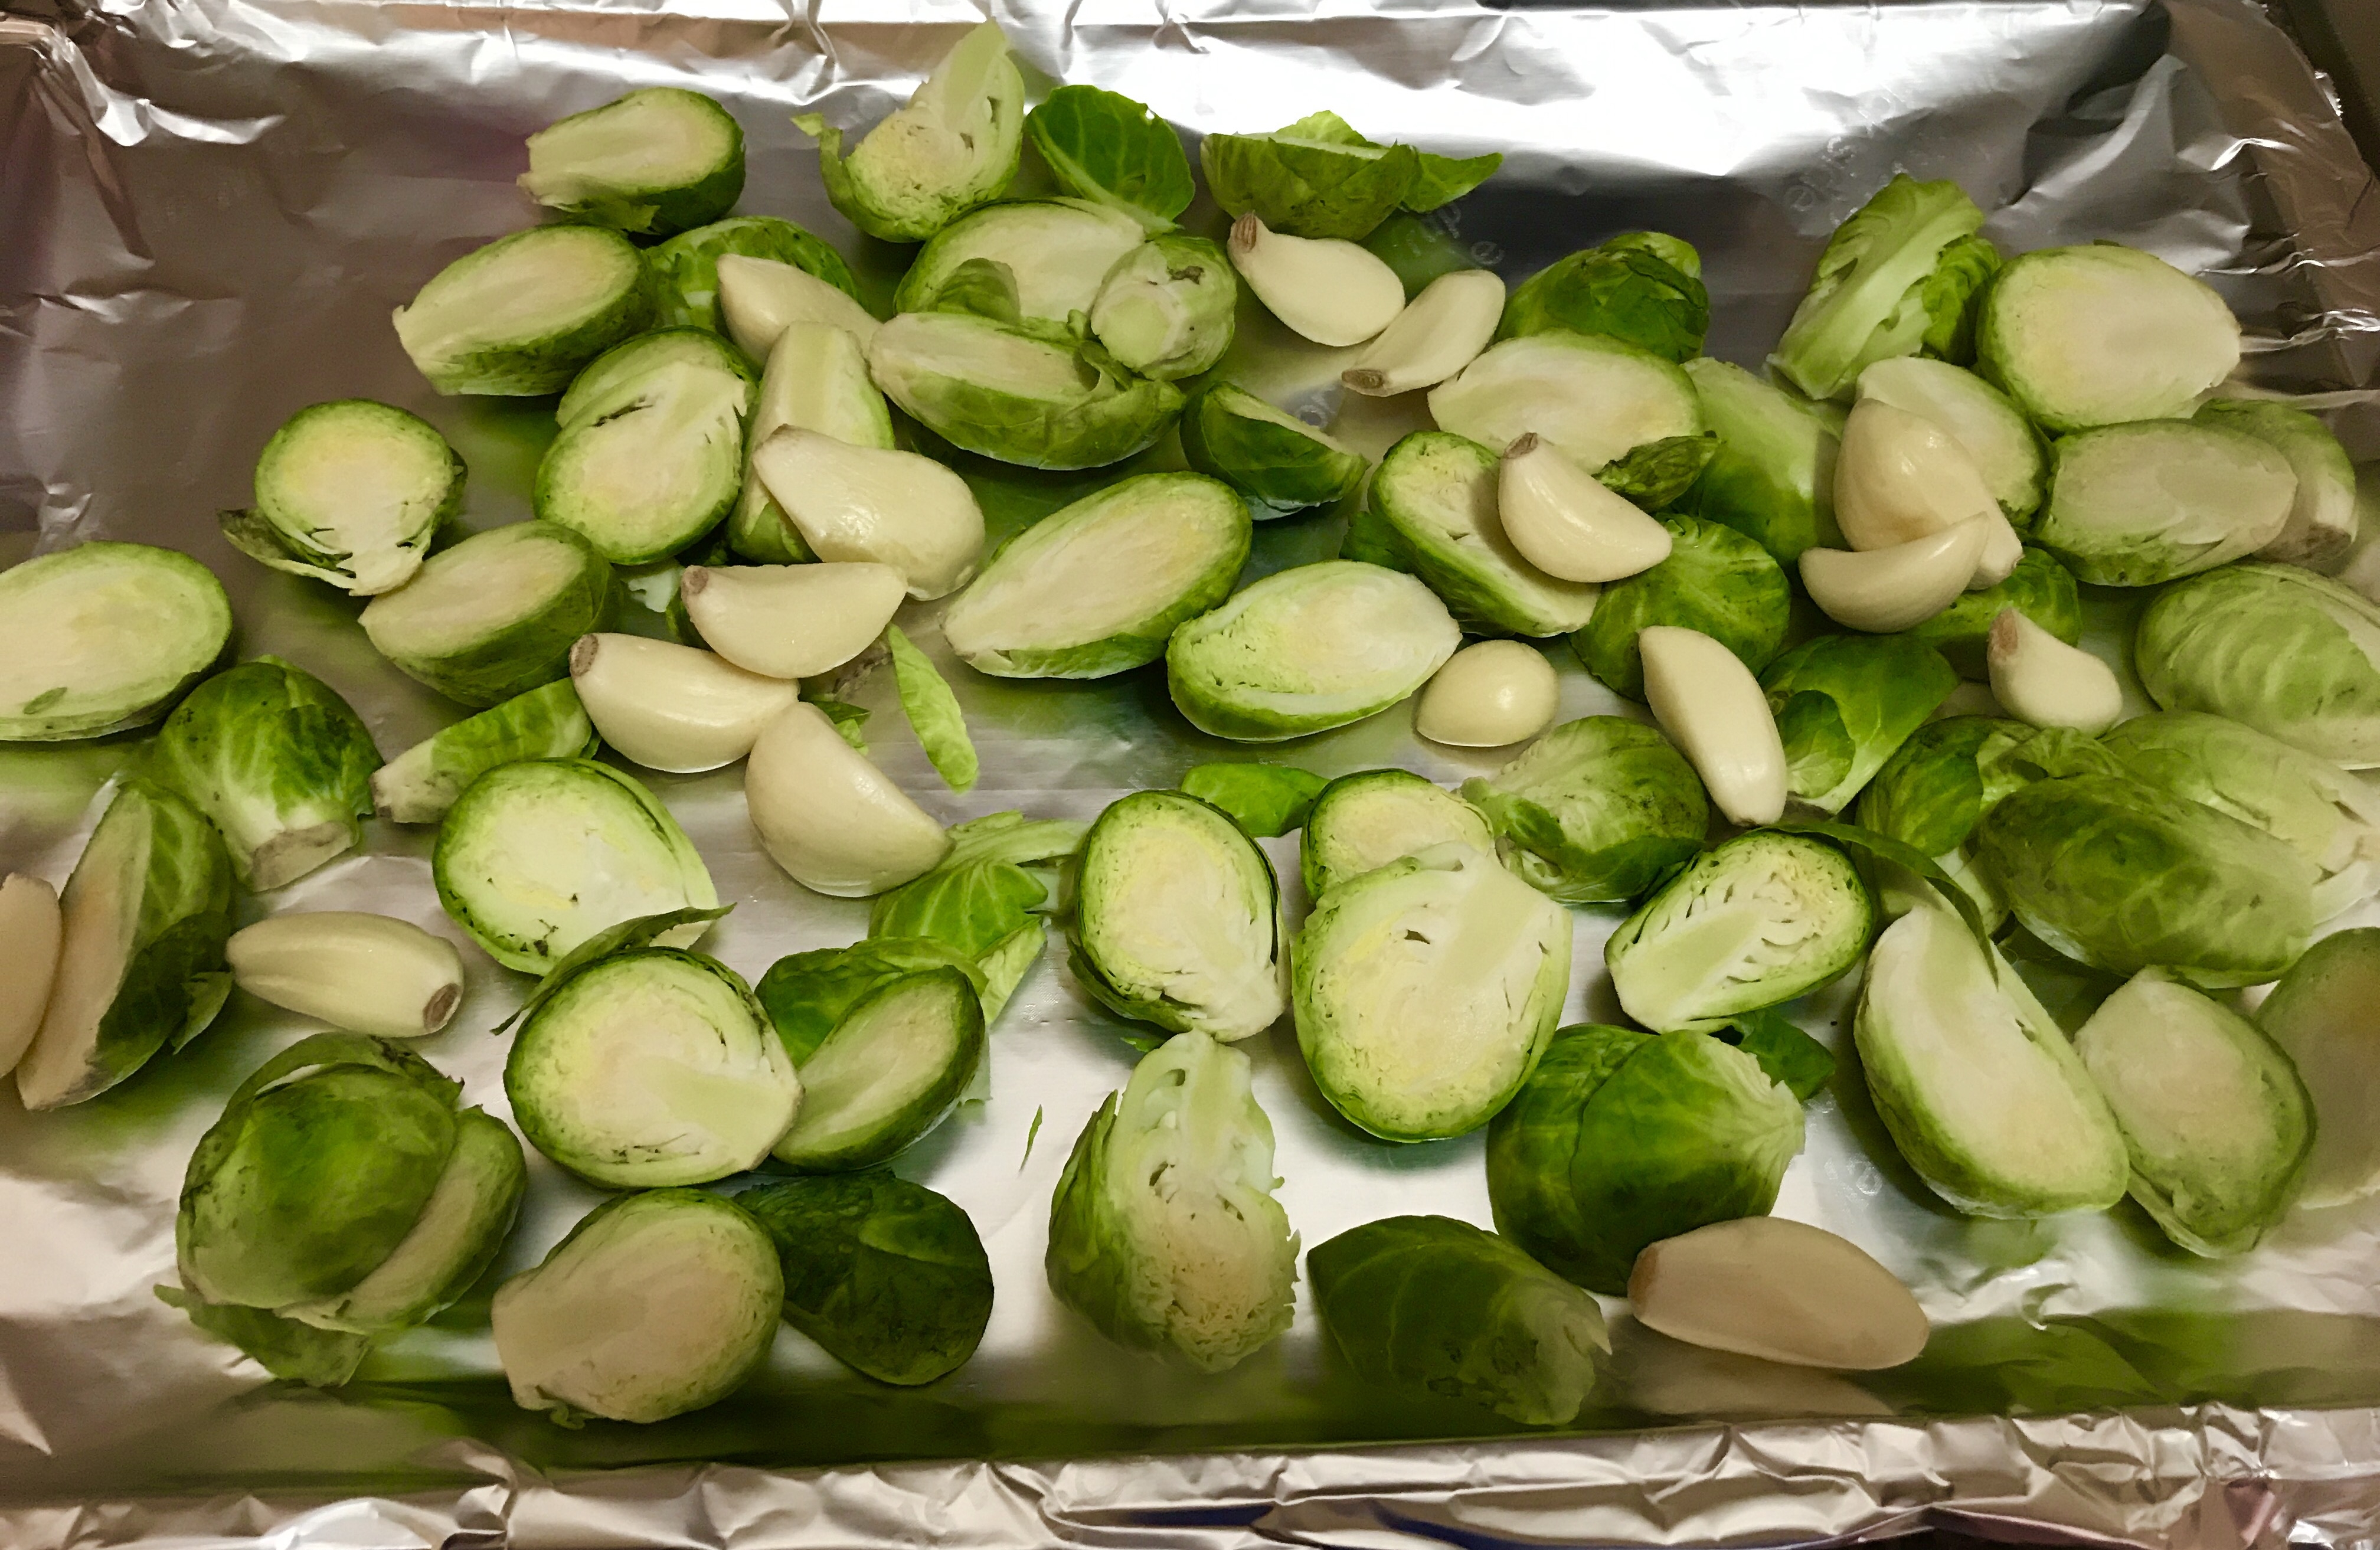 Roasted Curried Brussels Sprouts